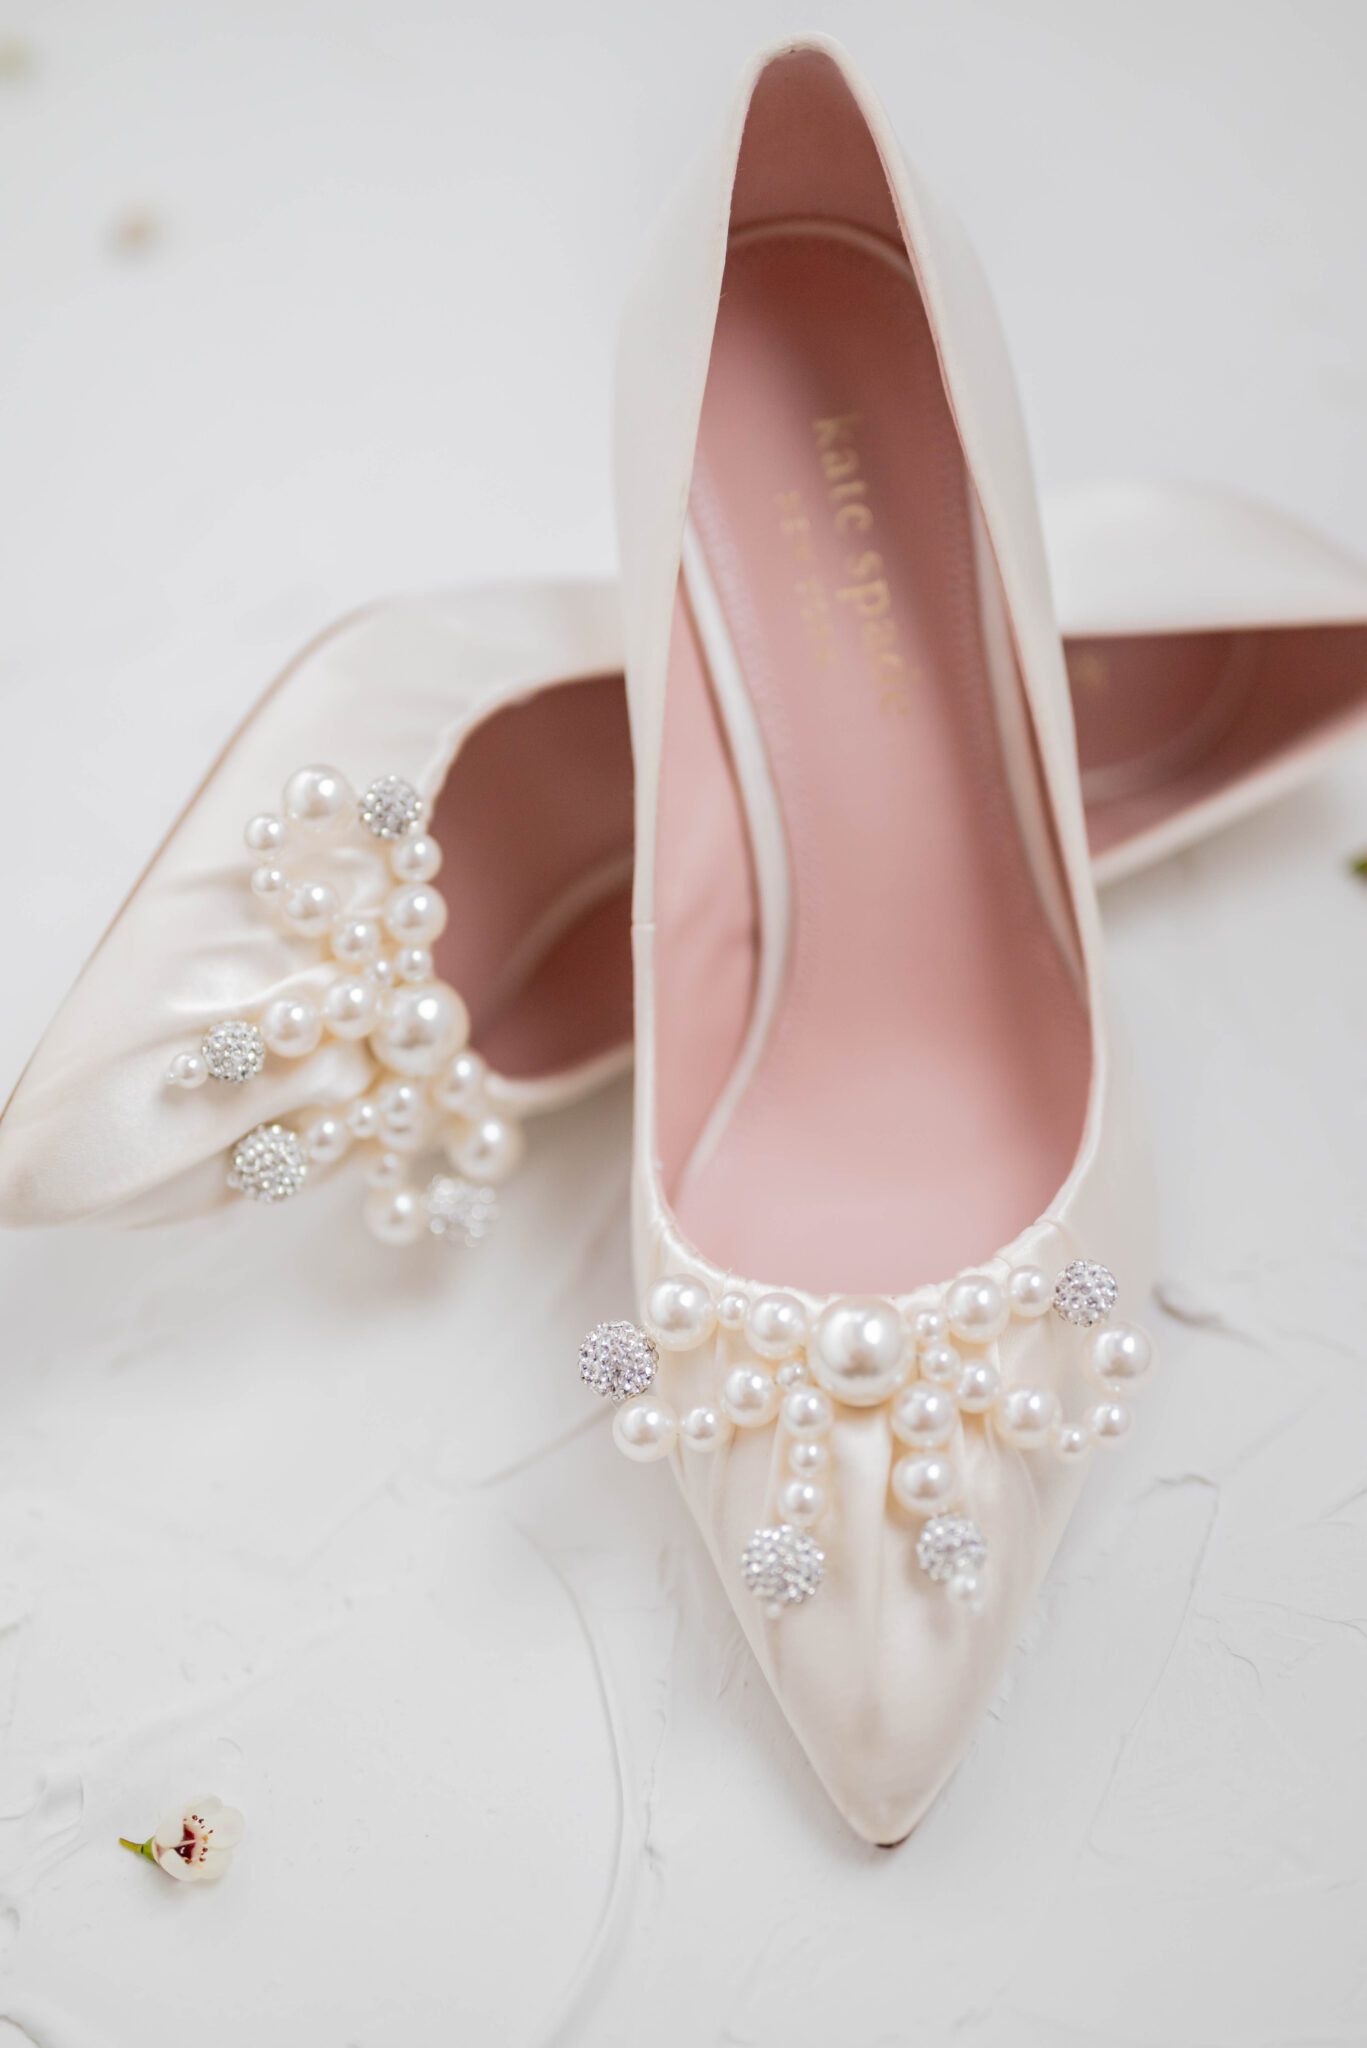 Elegant Kate Spade bridal shoes with delicate pearl detailing, detail photo inspiration. 